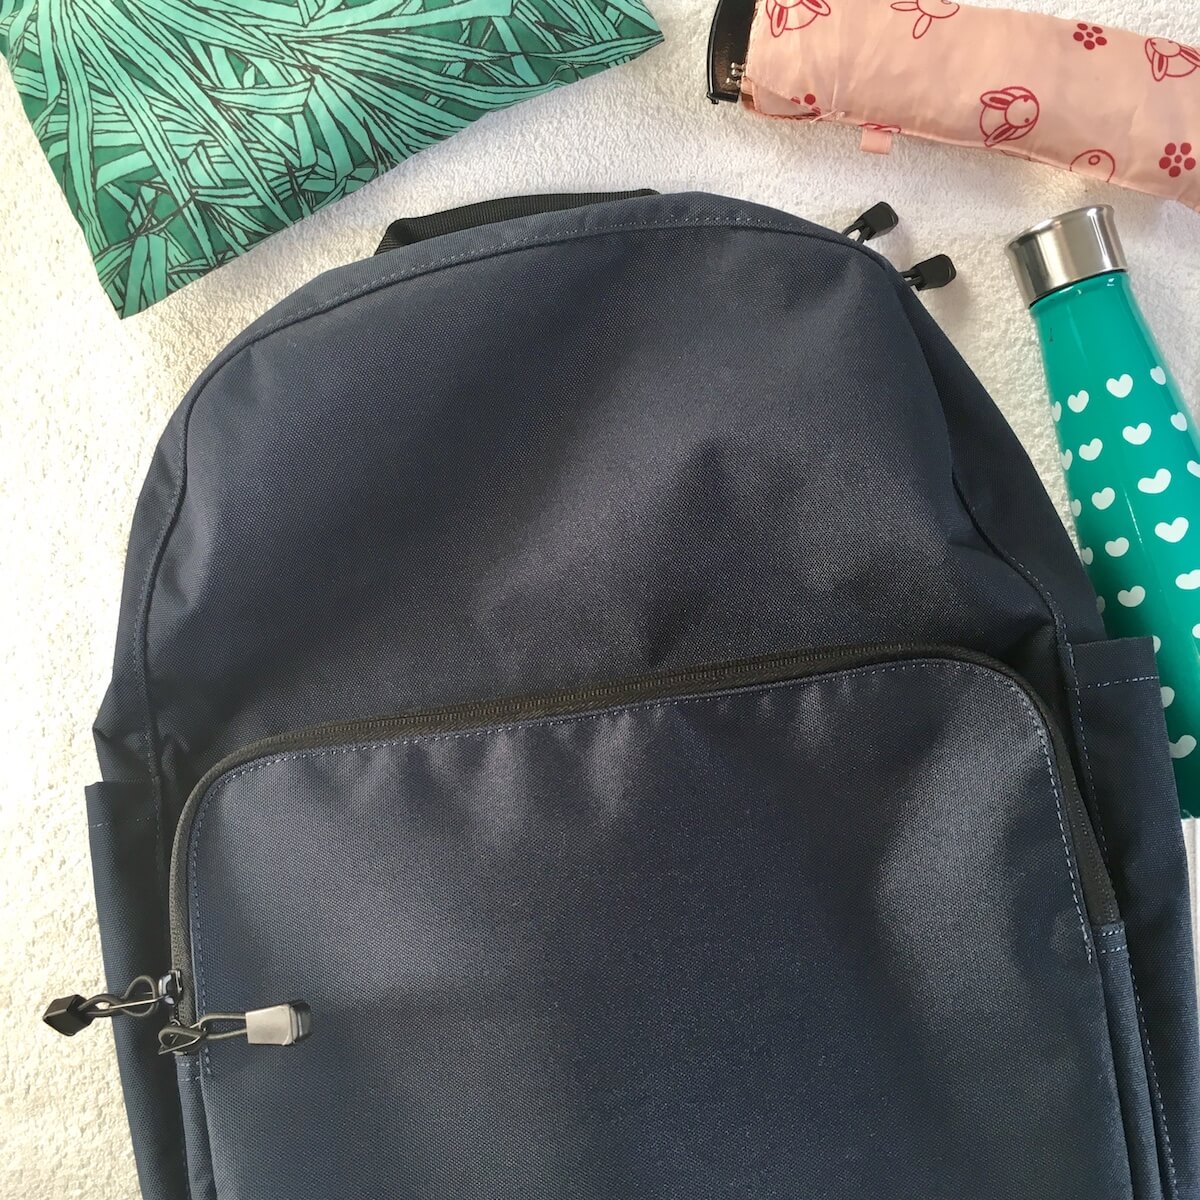 Lo & Sons Backpack Review: a flat lay of a navy backpack with some items such as an umbrella and water bottle.